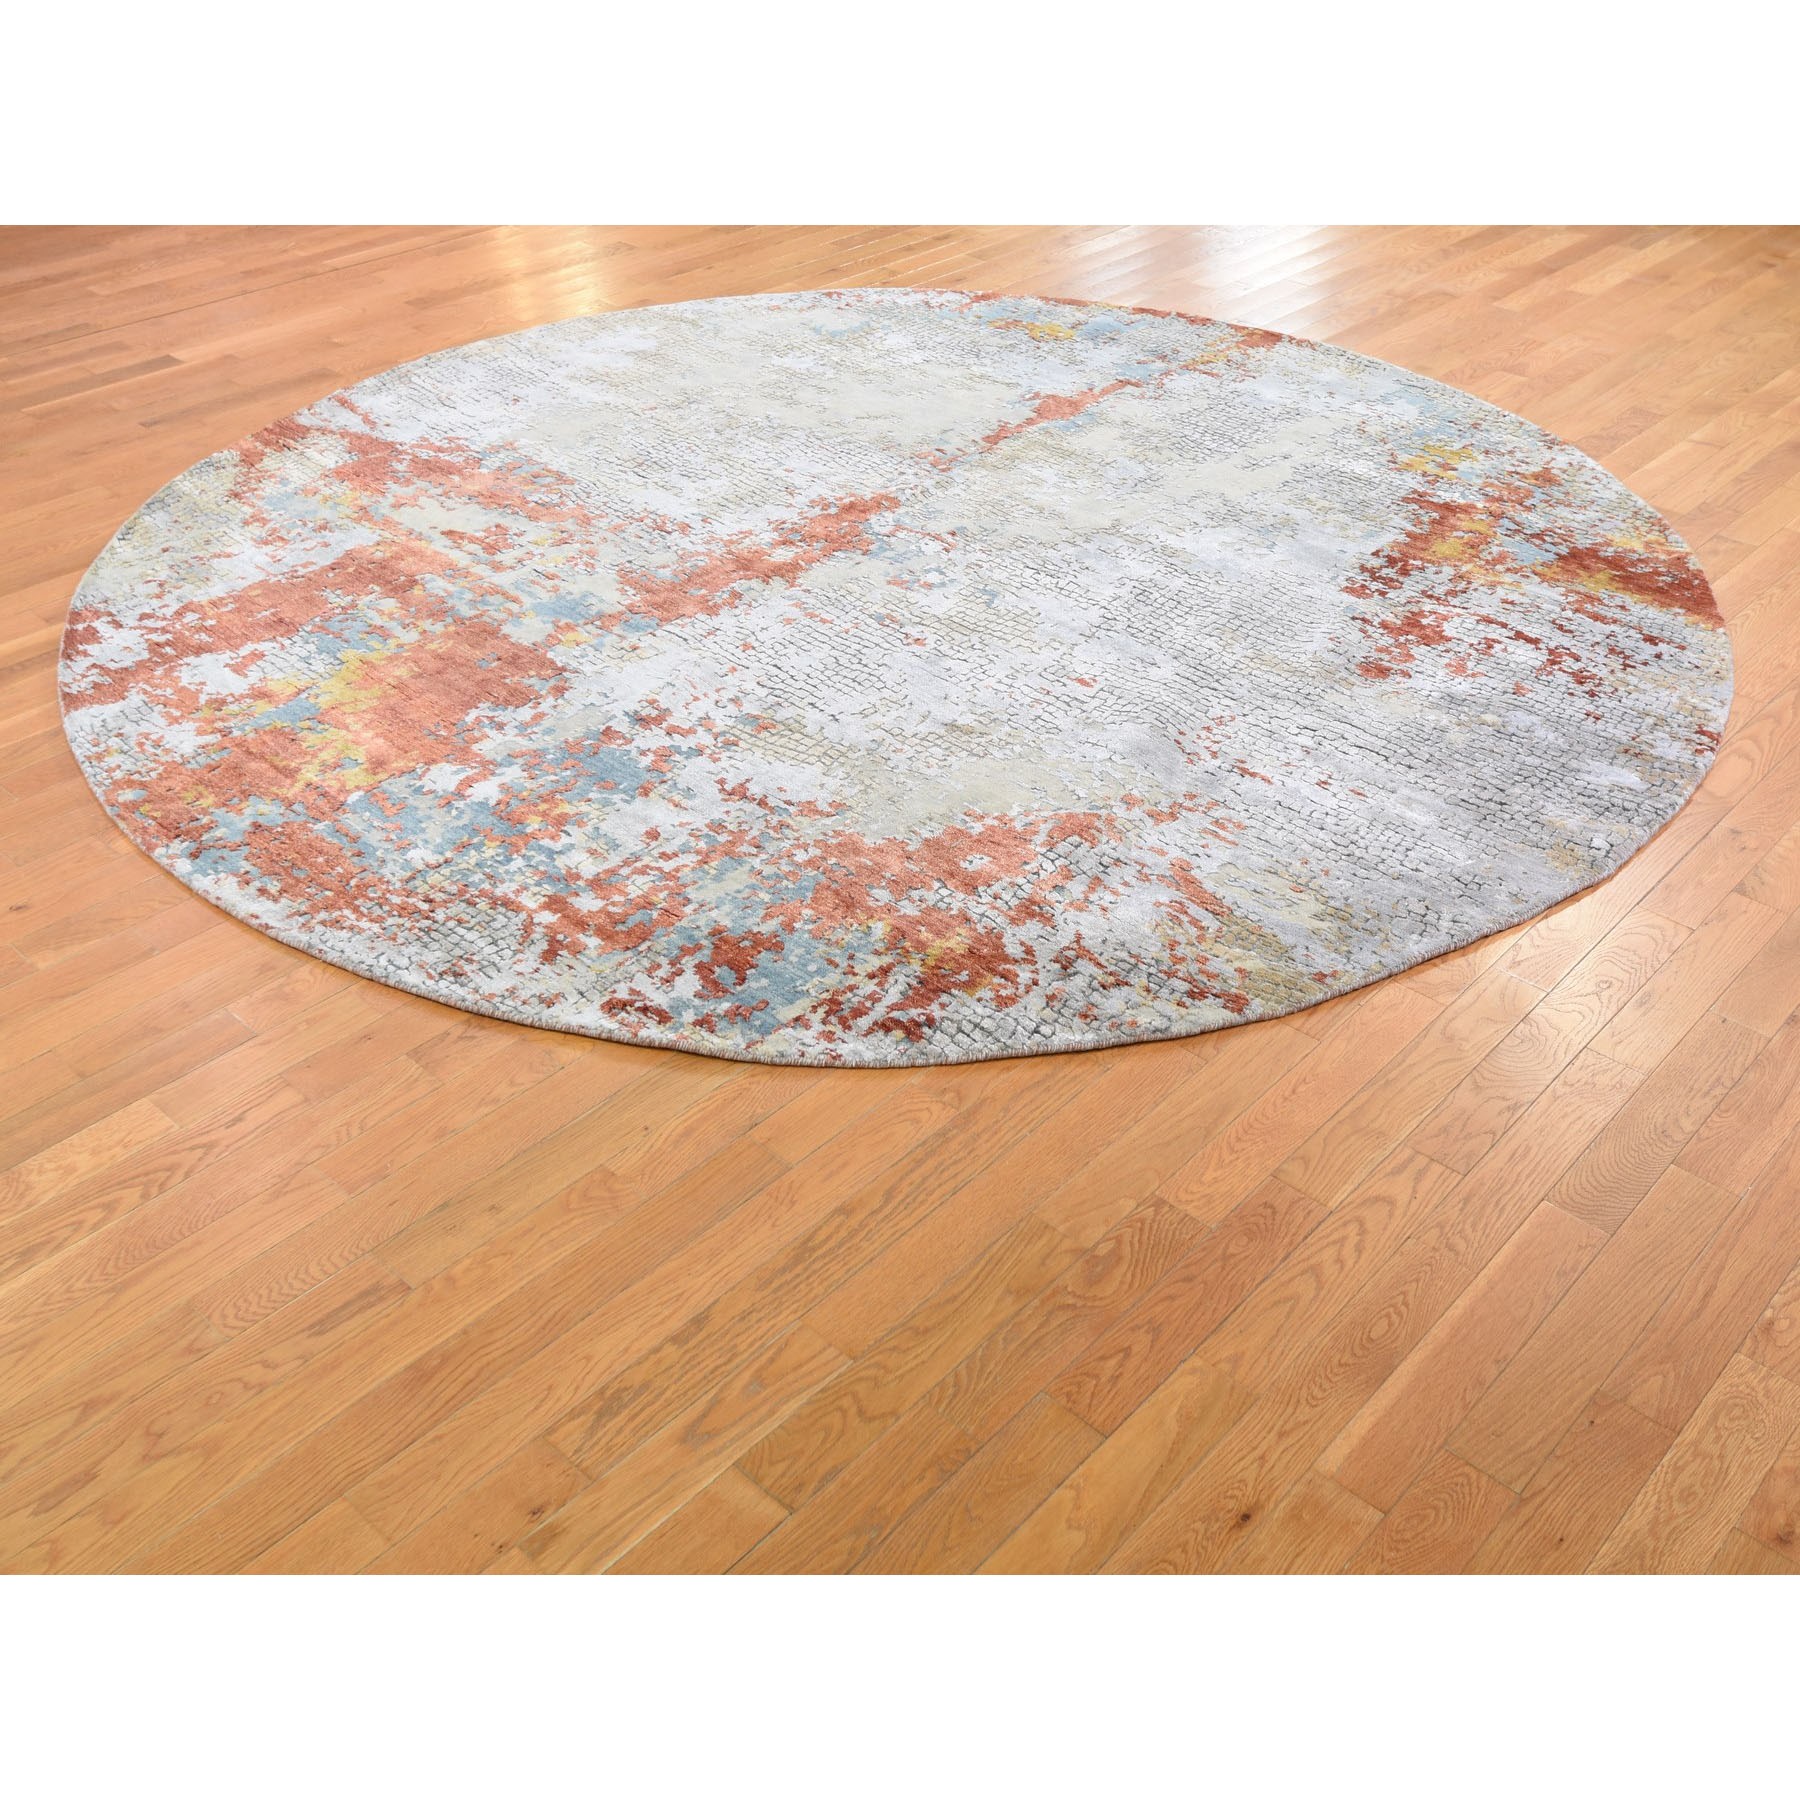 9-10-x9-10  Round Wool And Silk Abstract With Fire Mosaic Design Hand Knotted Oriental Rug 